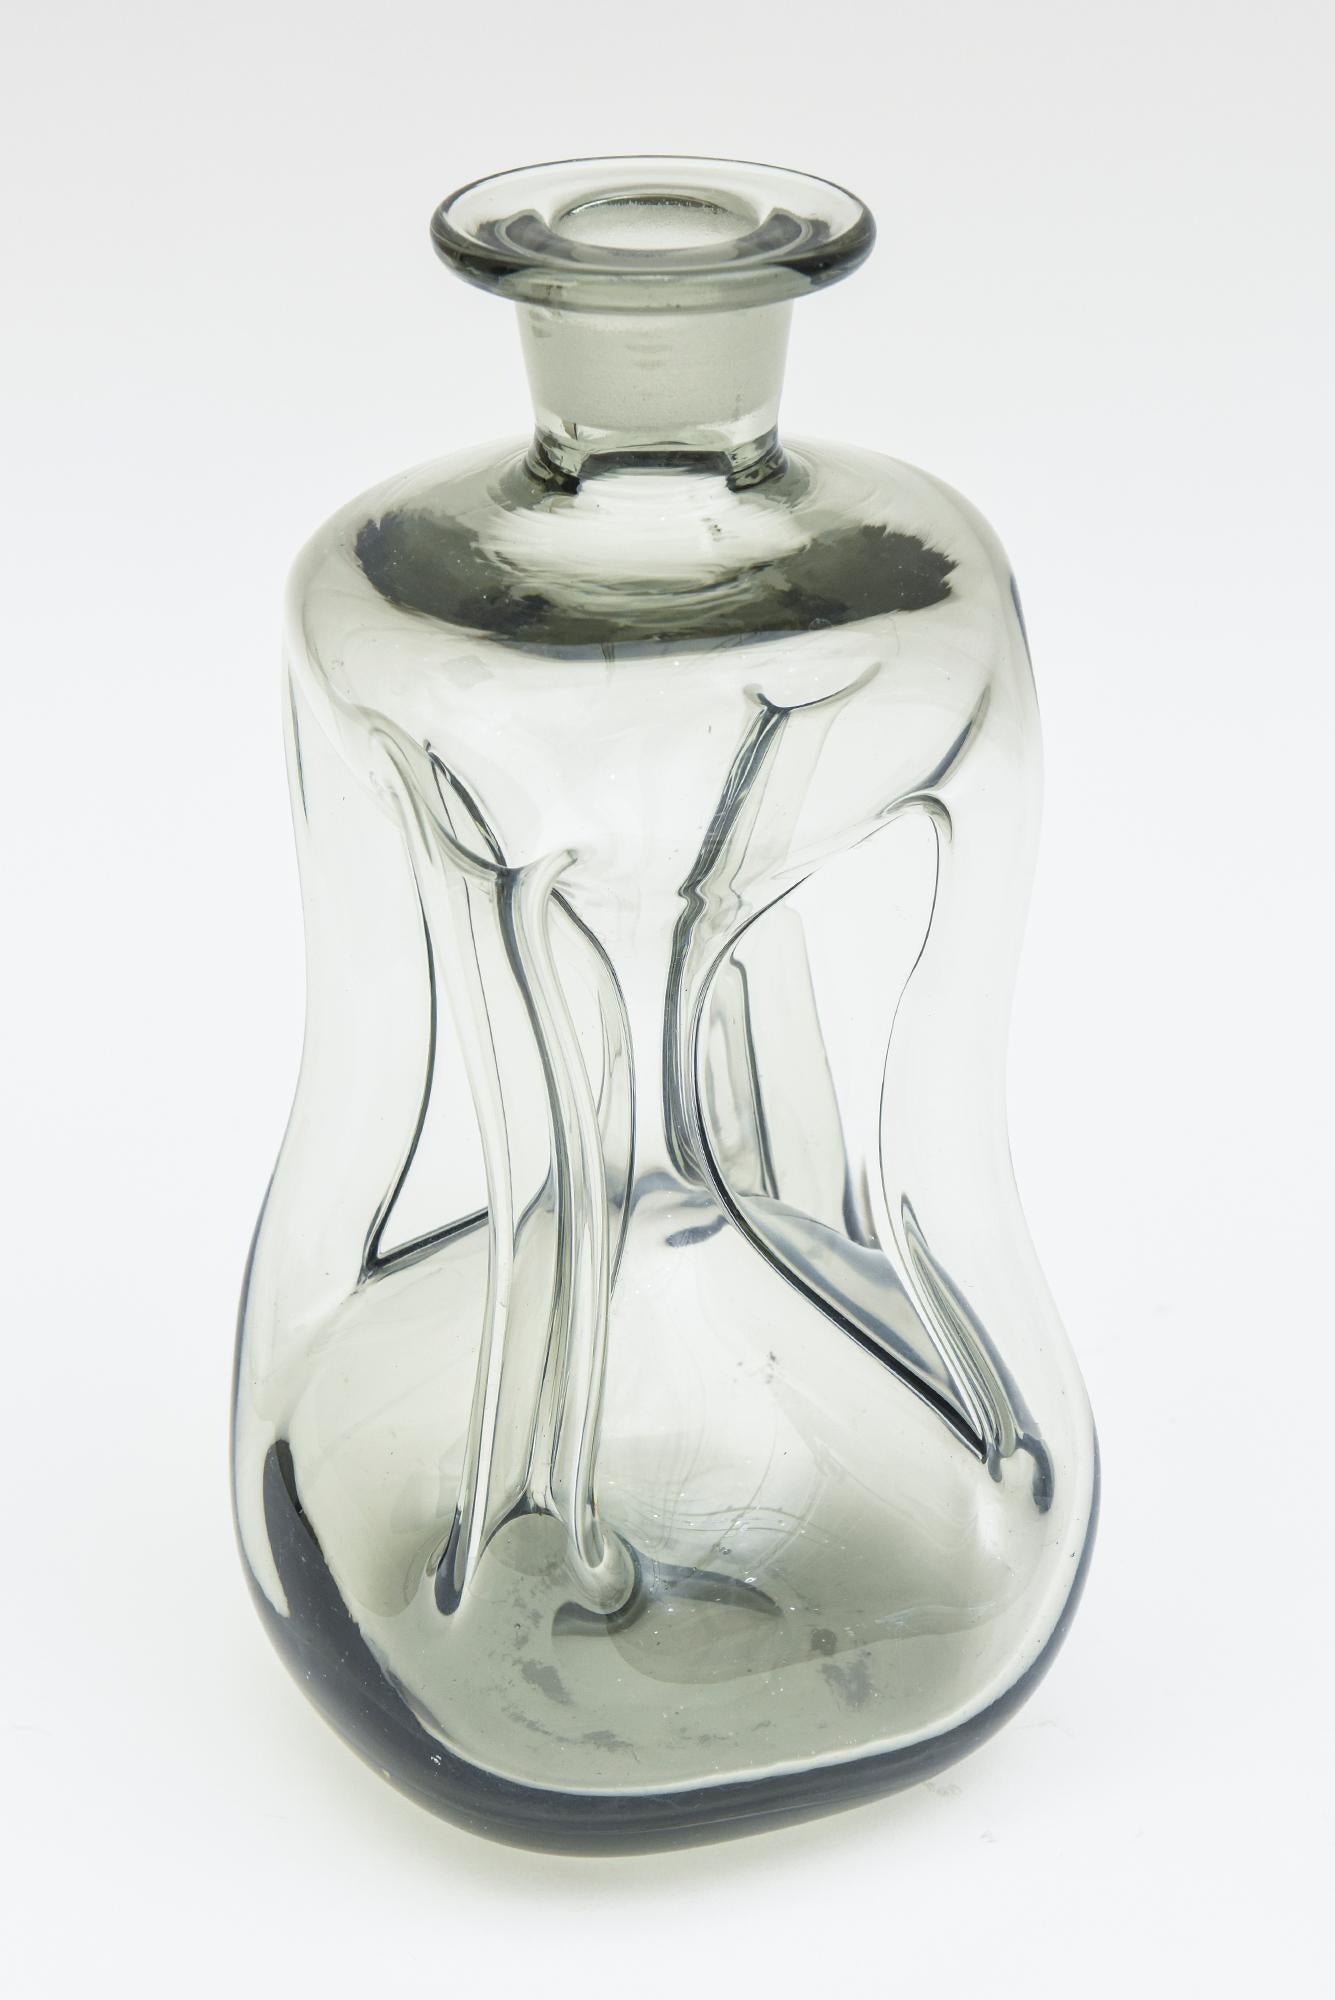 Smokey Gray Holmegaard Glass Cinched Decanter Bottle Rare Crown Stopper Vintage For Sale 1